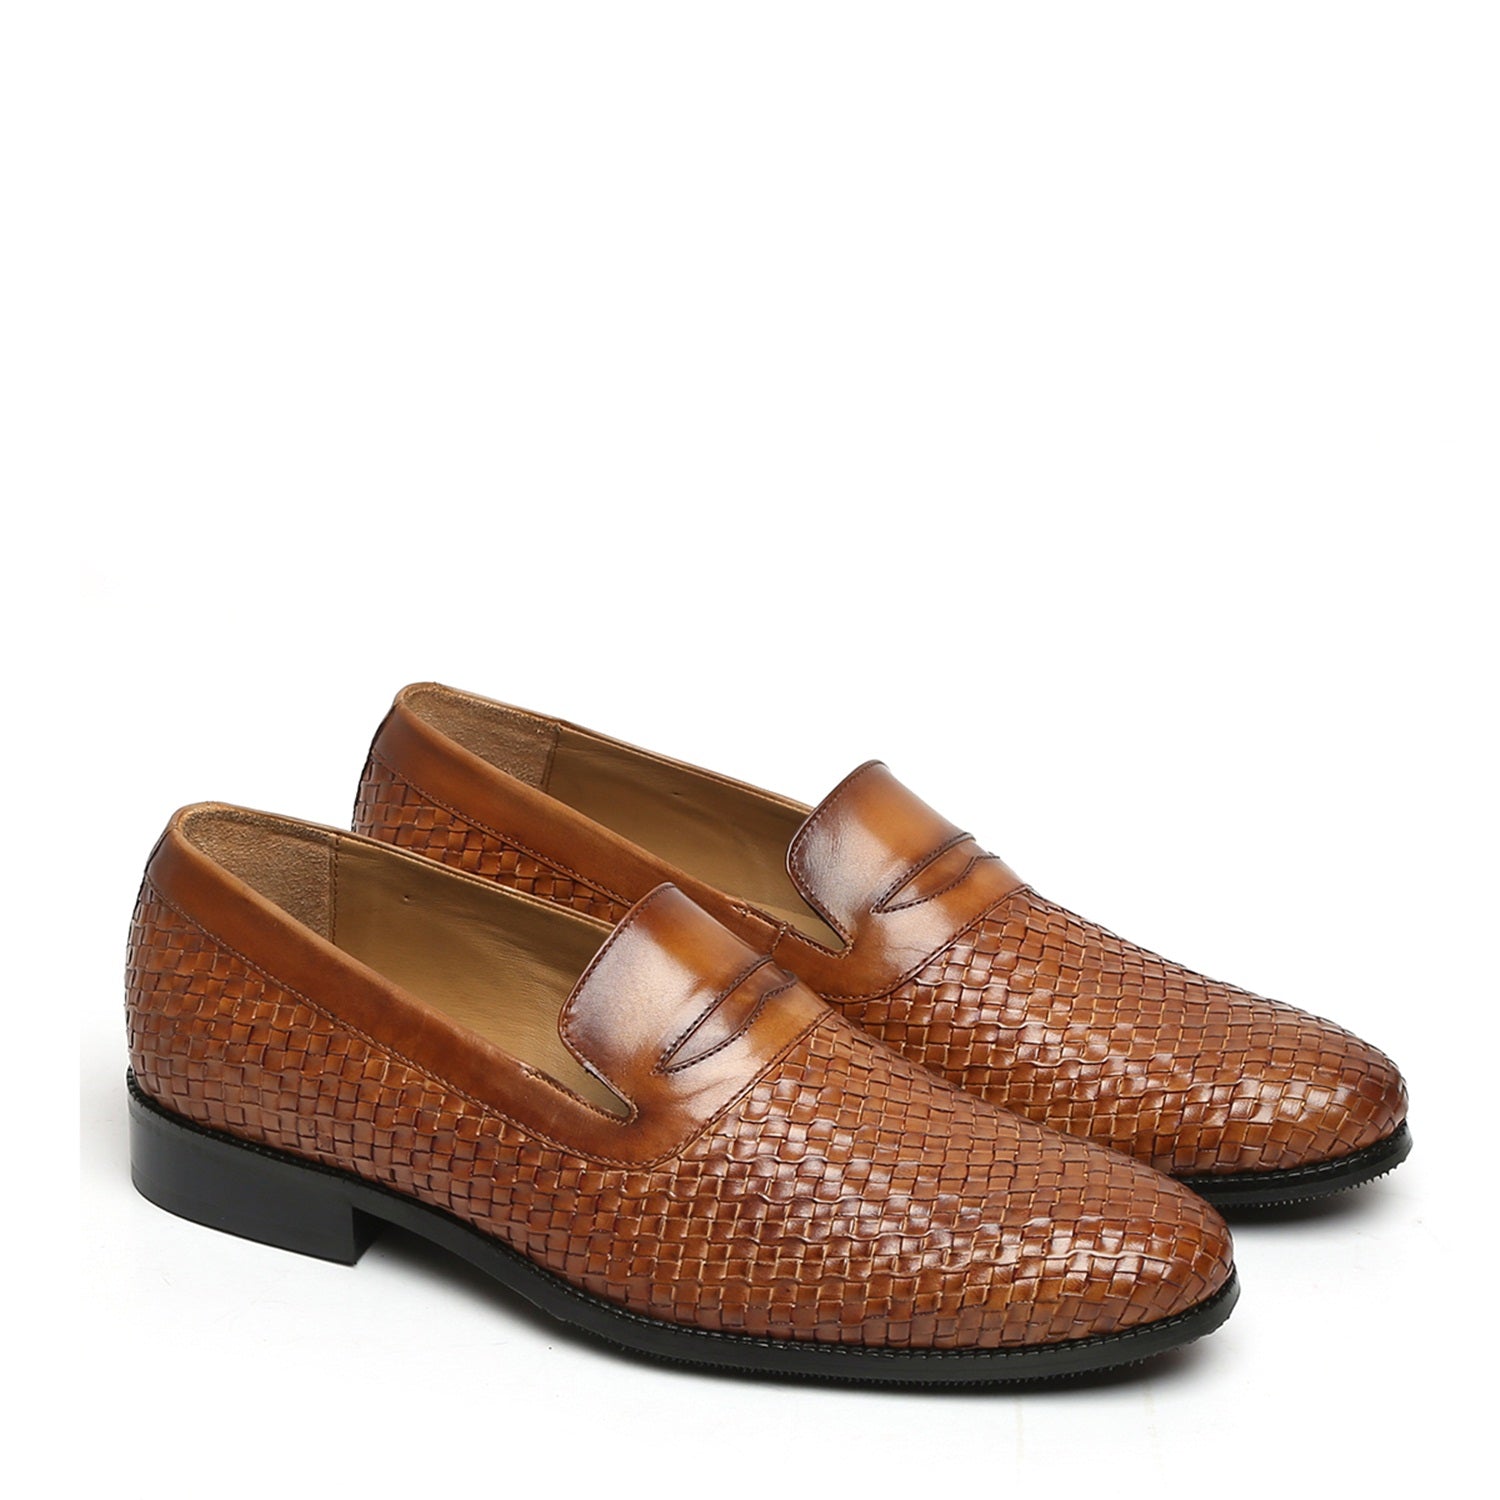 Tan Weaved Design Leather Loafers